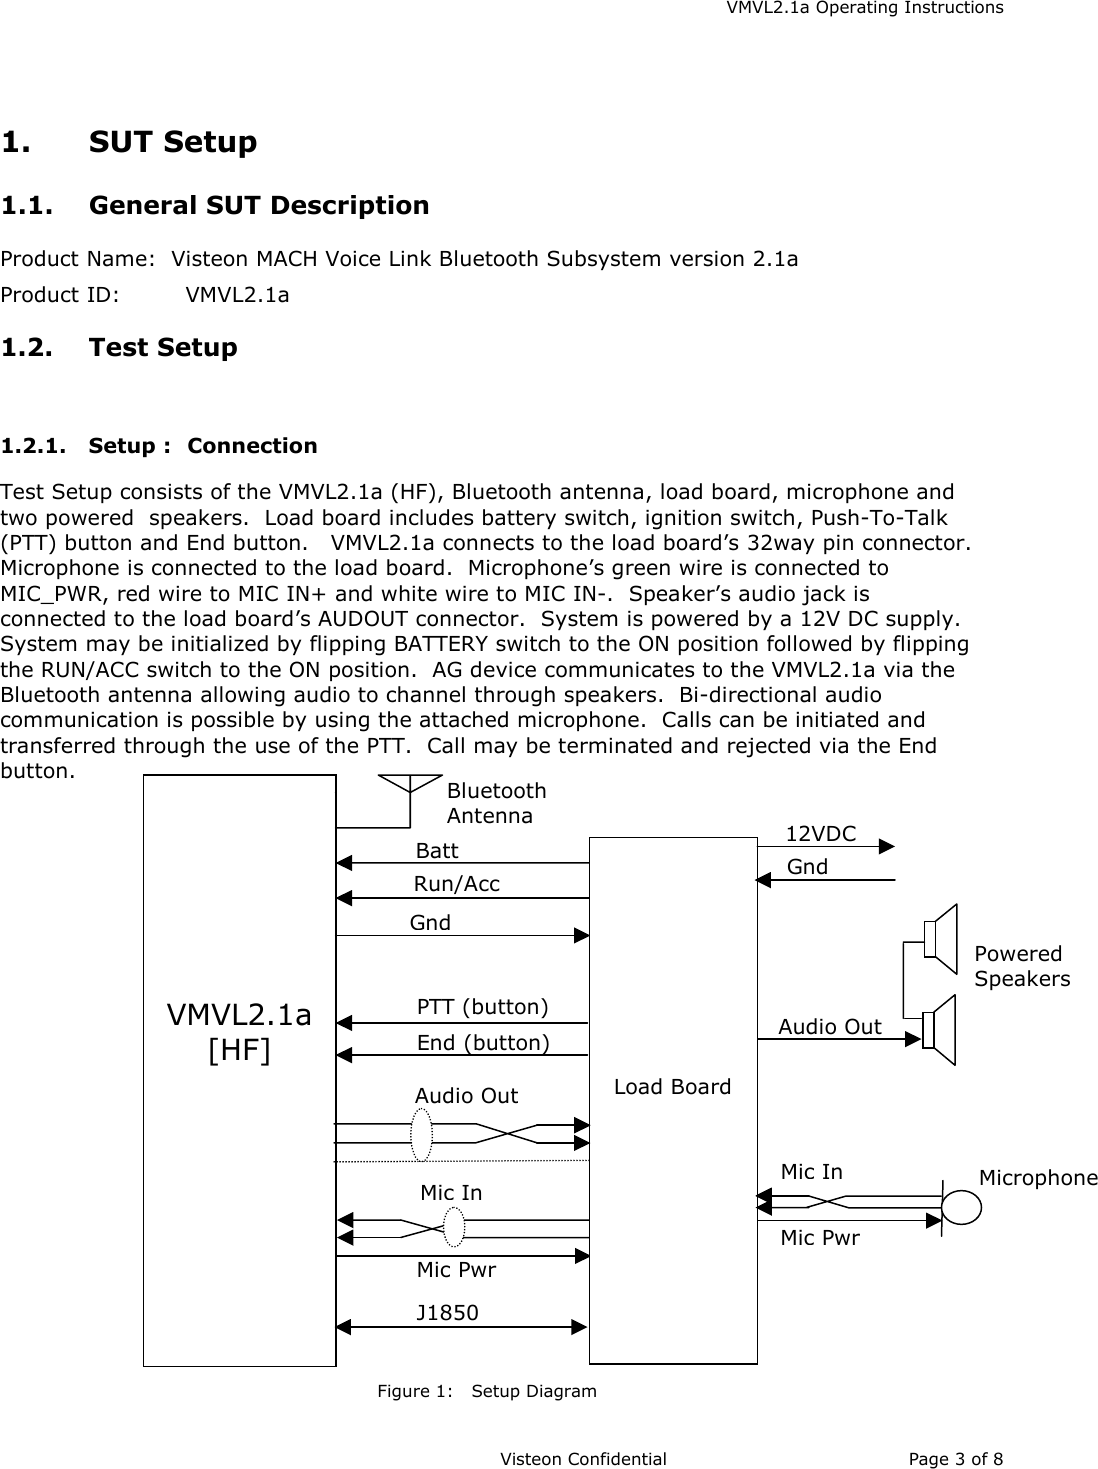    VMVL2.1a Operating Instructions                     Visteon Confidential Page 3 of 8   1. SUT Setup 1.1.  General SUT Description Product Name:  Visteon MACH Voice Link Bluetooth Subsystem version 2.1a   Product ID:        VMVL2.1a 1.2. Test Setup 1.2.1. Setup :  Connection Test Setup consists of the VMVL2.1a (HF), Bluetooth antenna, load board, microphone and two powered  speakers.  Load board includes battery switch, ignition switch, Push-To-Talk (PTT) button and End button.   VMVL2.1a connects to the load board’s 32way pin connector.  Microphone is connected to the load board.  Microphone’s green wire is connected to MIC_PWR, red wire to MIC IN+ and white wire to MIC IN-.  Speaker’s audio jack is connected to the load board’s AUDOUT connector.  System is powered by a 12V DC supply.  System may be initialized by flipping BATTERY switch to the ON position followed by flipping the RUN/ACC switch to the ON position.  AG device communicates to the VMVL2.1a via the Bluetooth antenna allowing audio to channel through speakers.  Bi-directional audio communication is possible by using the attached microphone.  Calls can be initiated and transferred through the use of the PTT.  Call may be terminated and rejected via the End button.                         Figure 1:   Setup Diagram           VMVL2.1a [HF]          Load Board  Batt GndBluetooth Antenna Mic InAudio Out Run/Acc PTT (button) 12VDC J1850  End (button) Powered Speakers Mic PwrAudio Out Mic InMic PwrGnd Microphone 